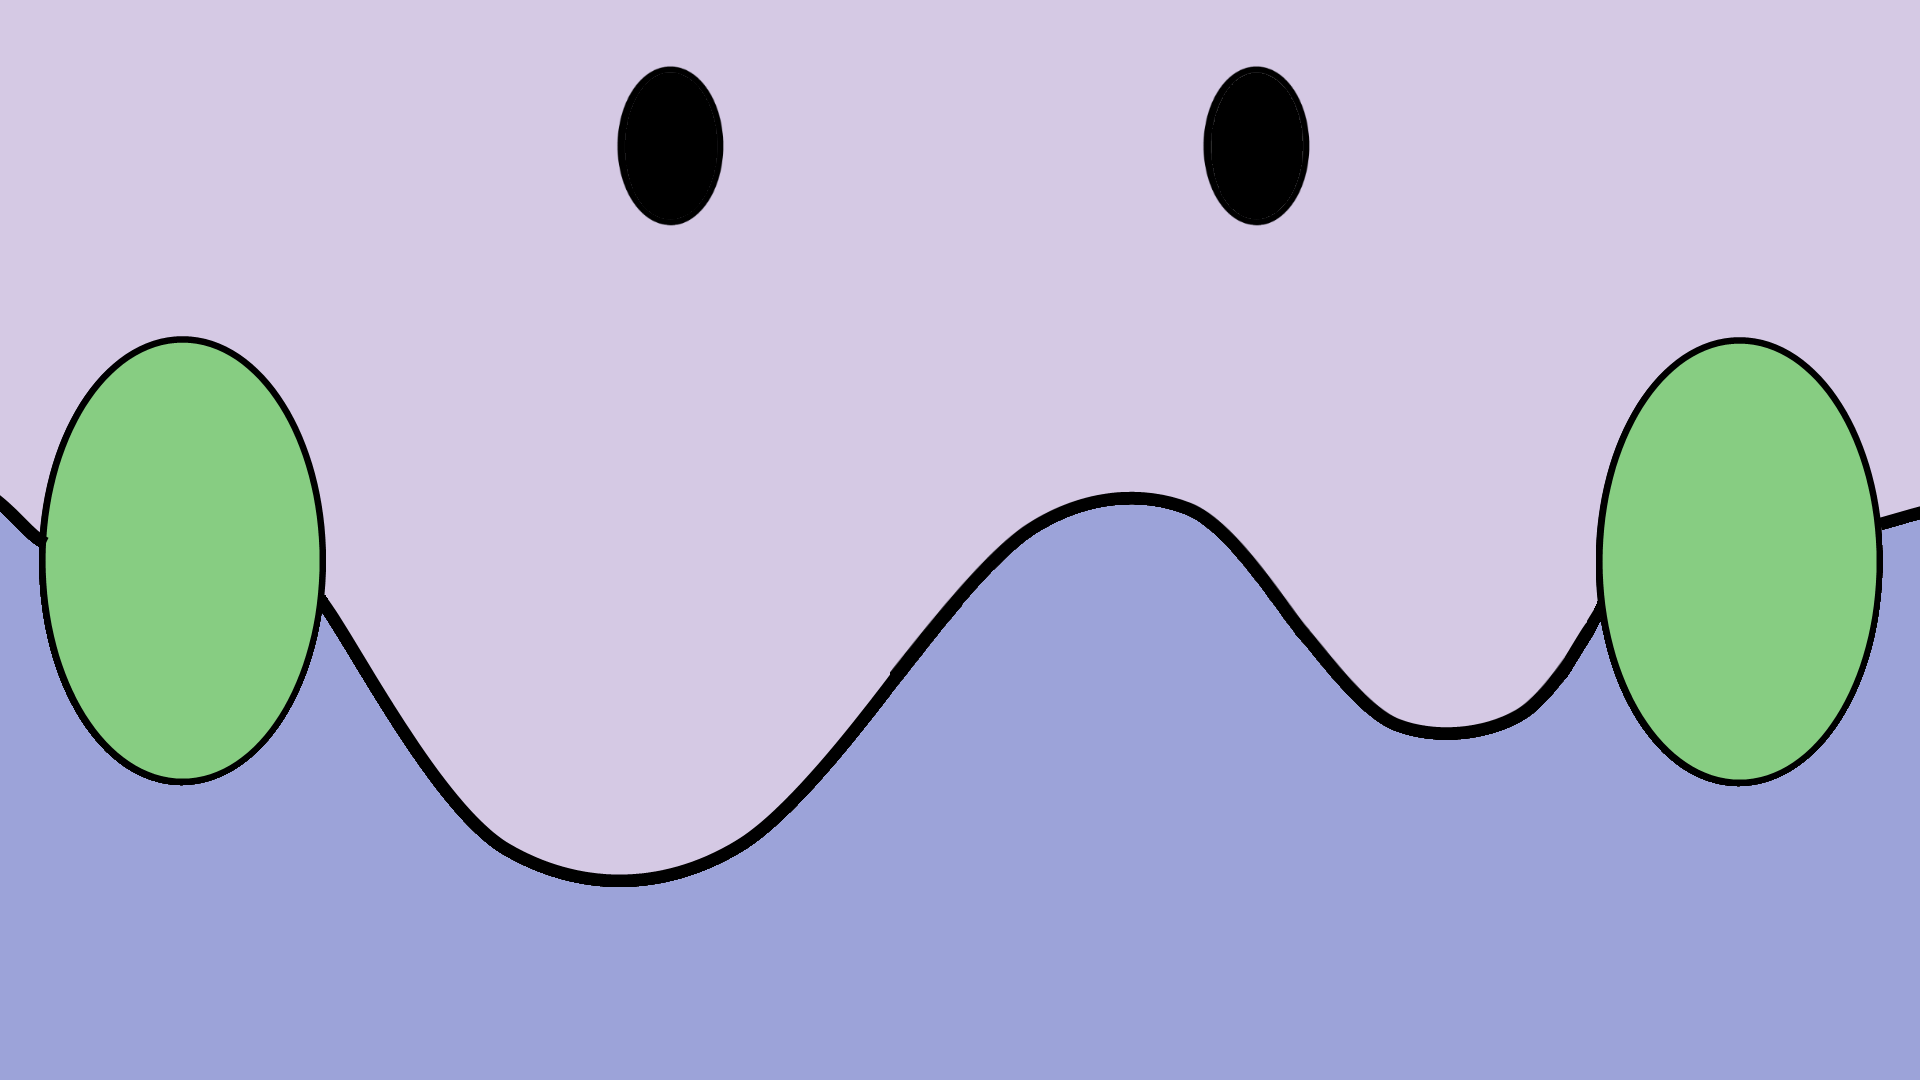 Update for the goomy wallpaper, any improvements? also planning